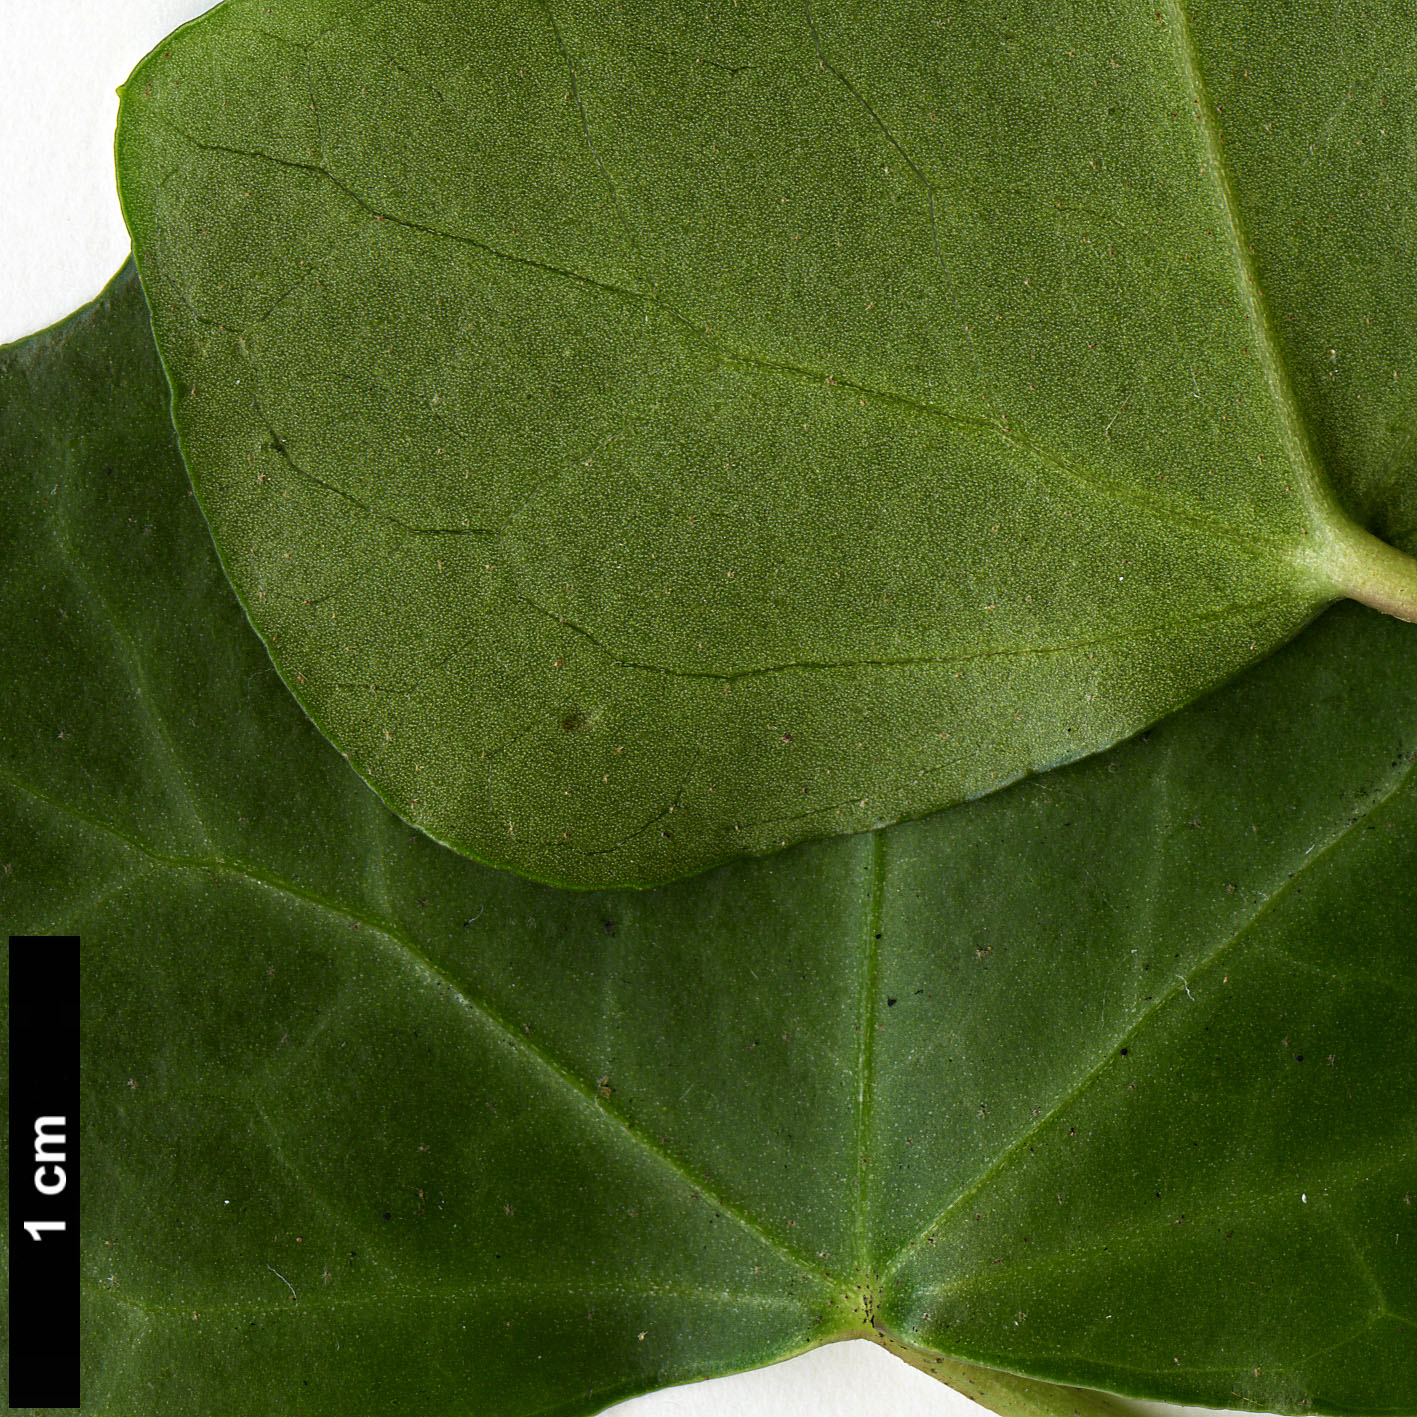 High resolution image: Family: Araliaceae - Genus: Hedera - Taxon: maderensis